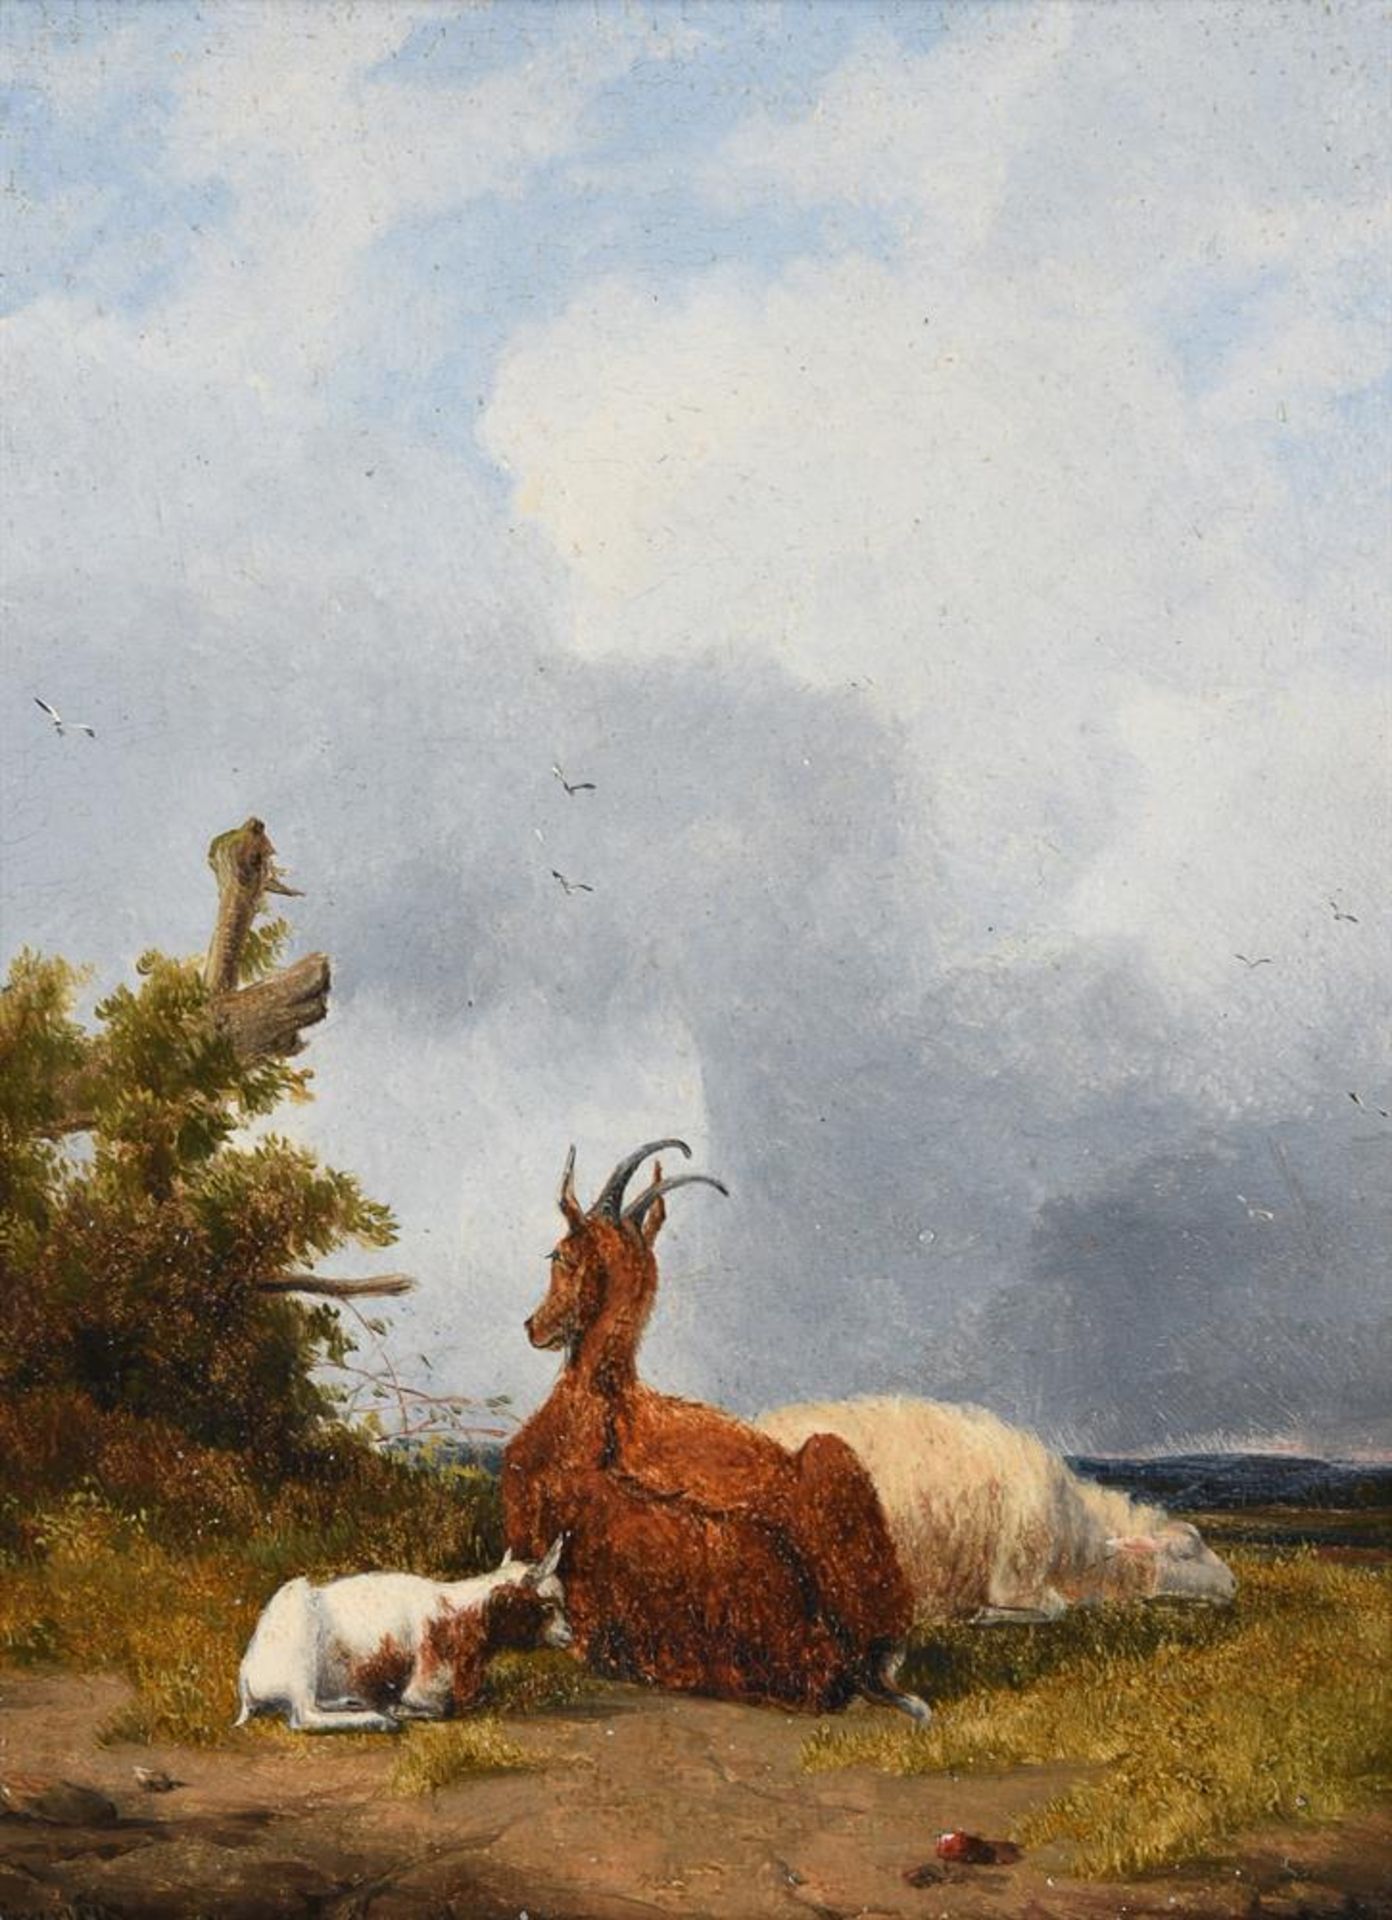 ALEXANDRE THOMAS FRANCIA (FRENCH B. CIRCA 1815-1884), GOATS AND SHEEP RESTING IN A LANDSCAPE (2) - Image 2 of 4